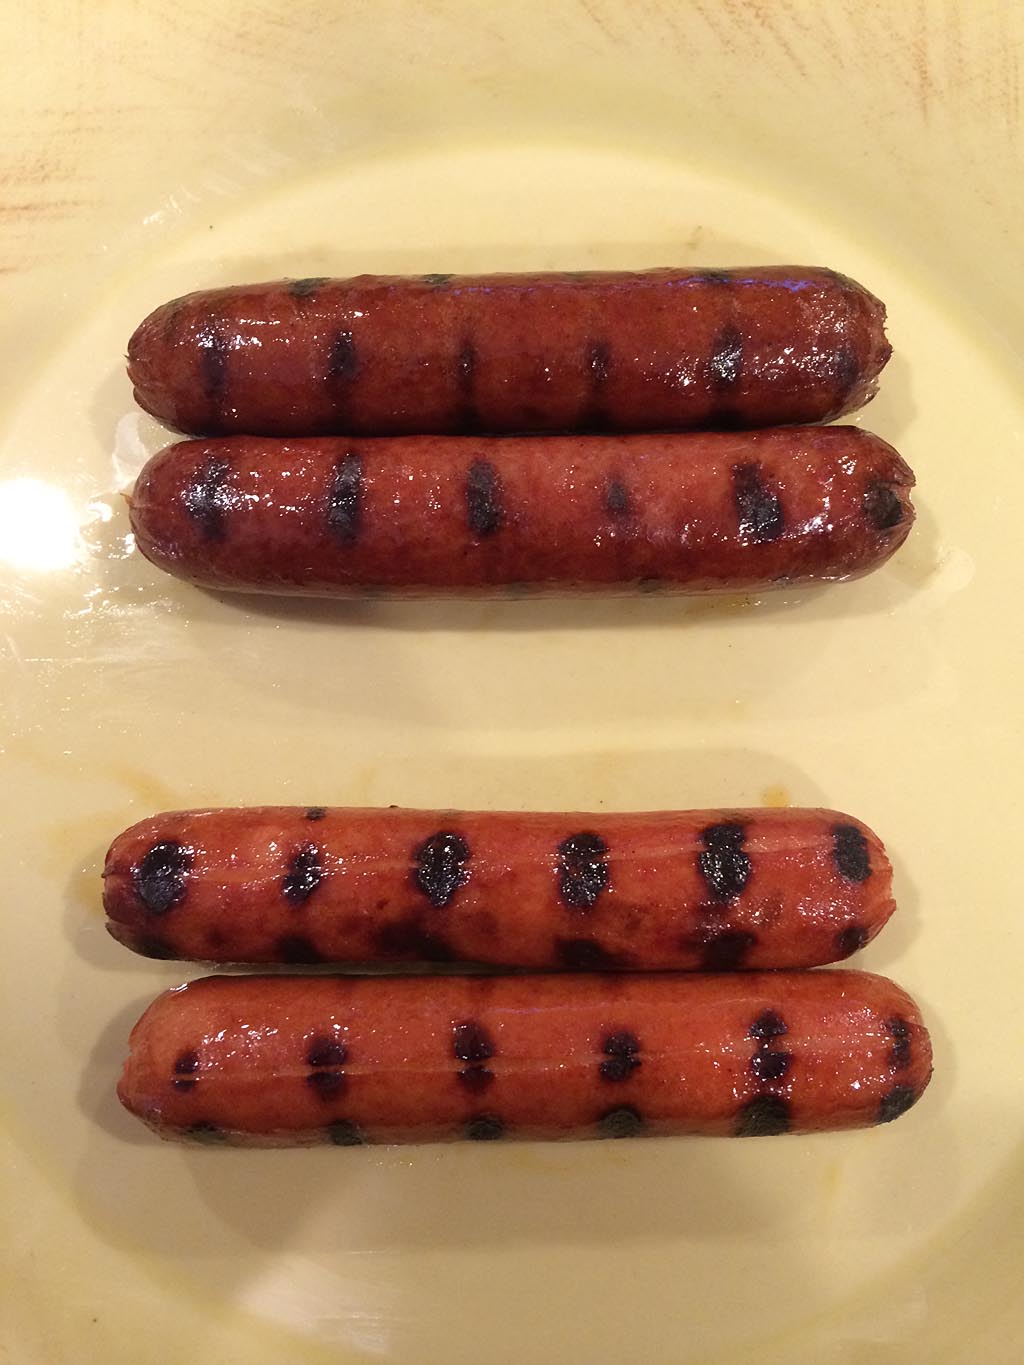 Hot dogs ready for judging